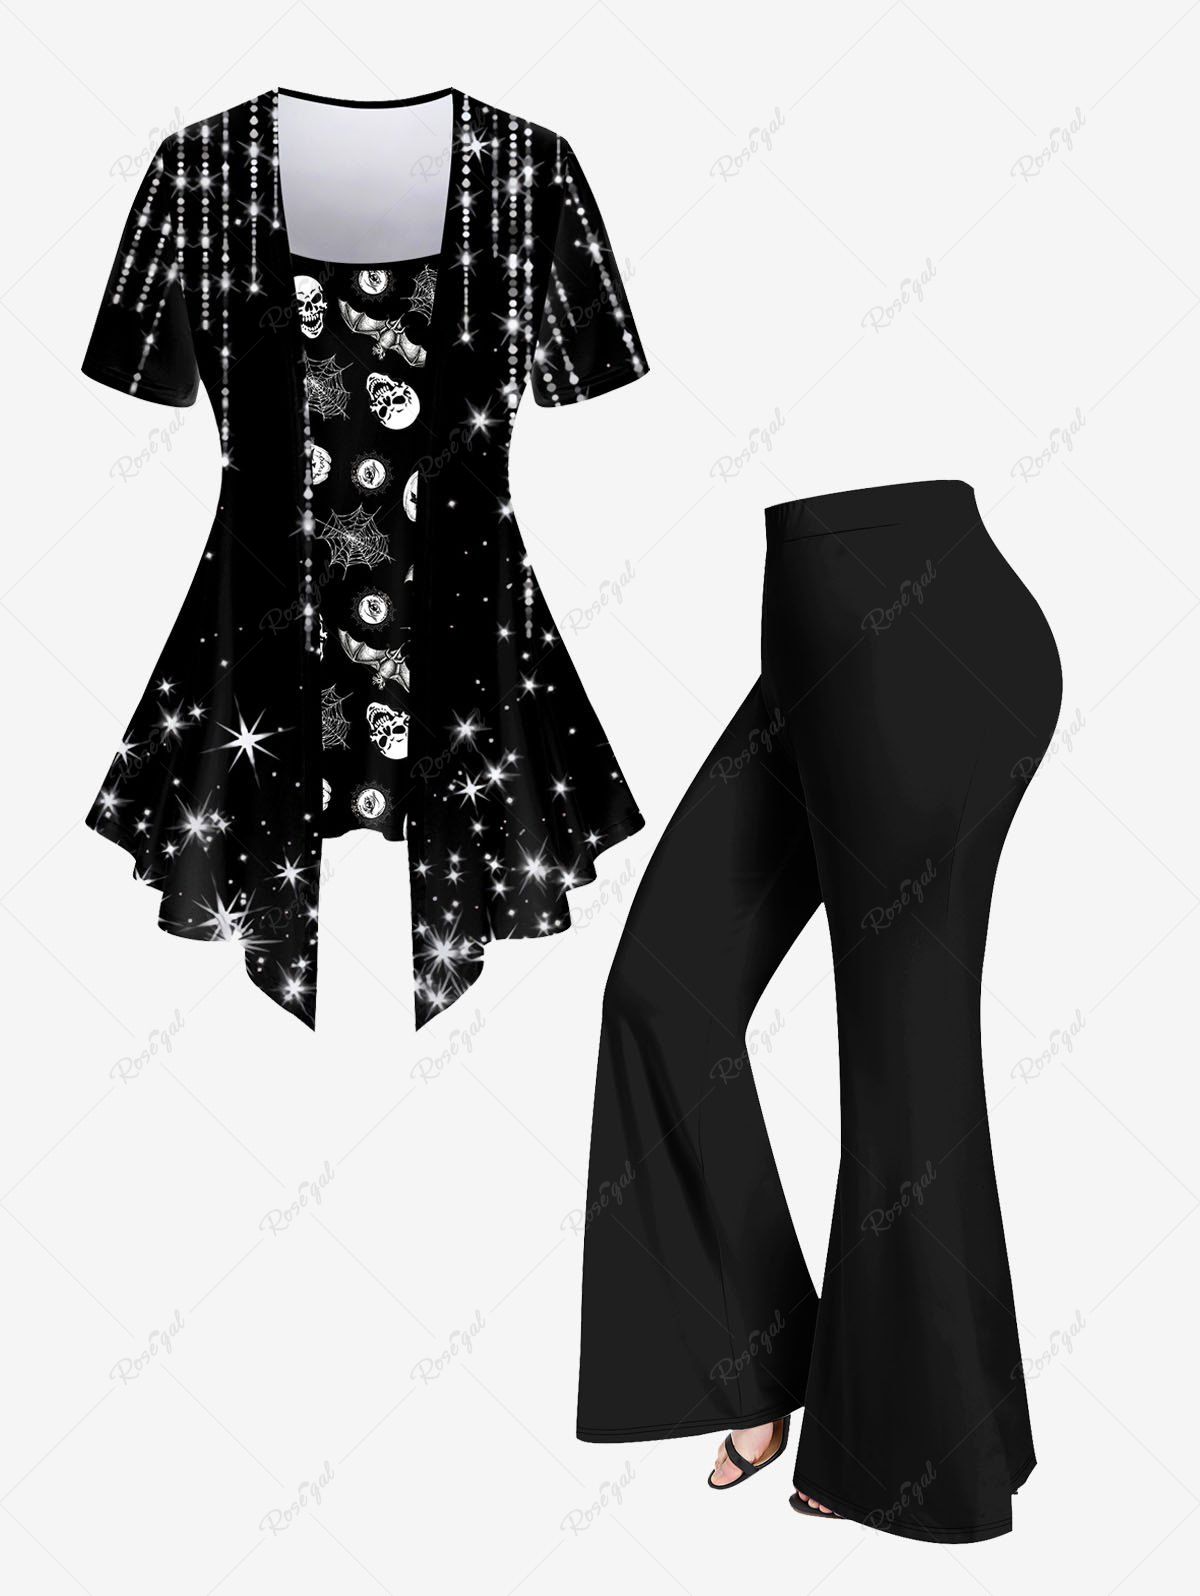 Best Skull Bat Spider Web Tassel Glitter Printed Asymmetrical T-shirt and Pull On Bell Bottom Pants Plus Size Outfit  